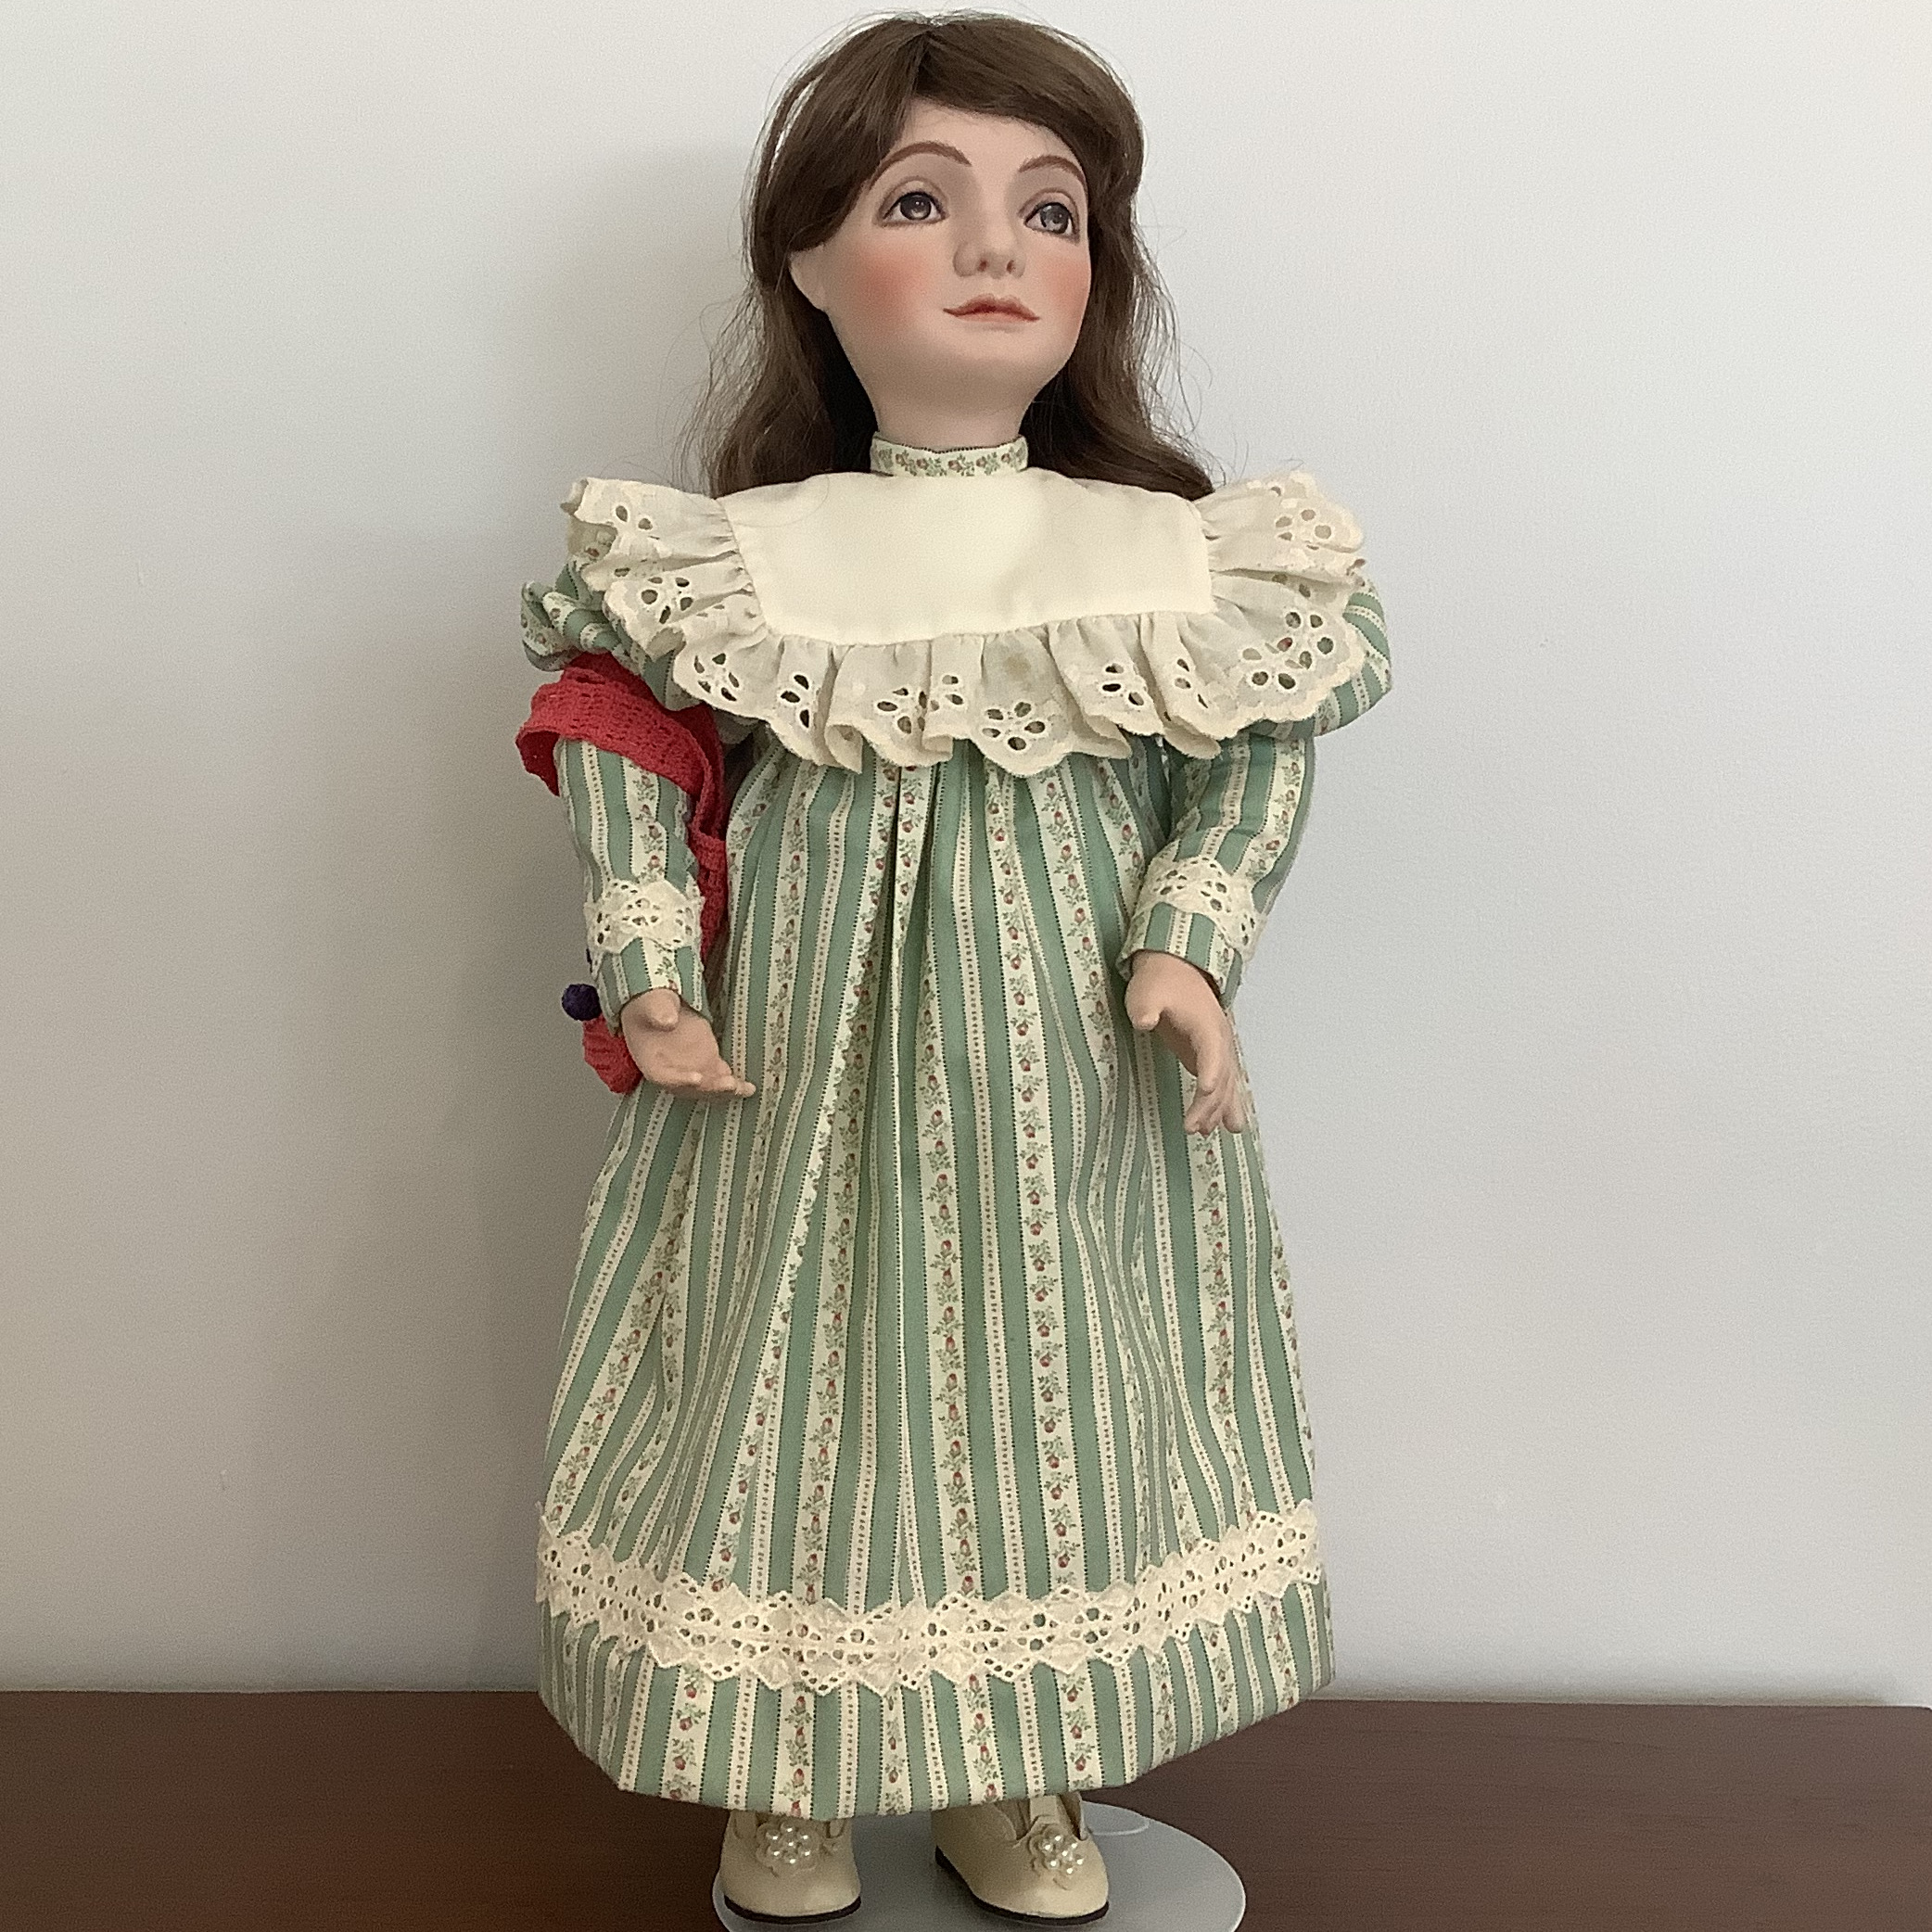 19-inch sculpted Mary Jo doll with painted eyes and long brown hair in a green dress with white eyelet-trimmed yoke